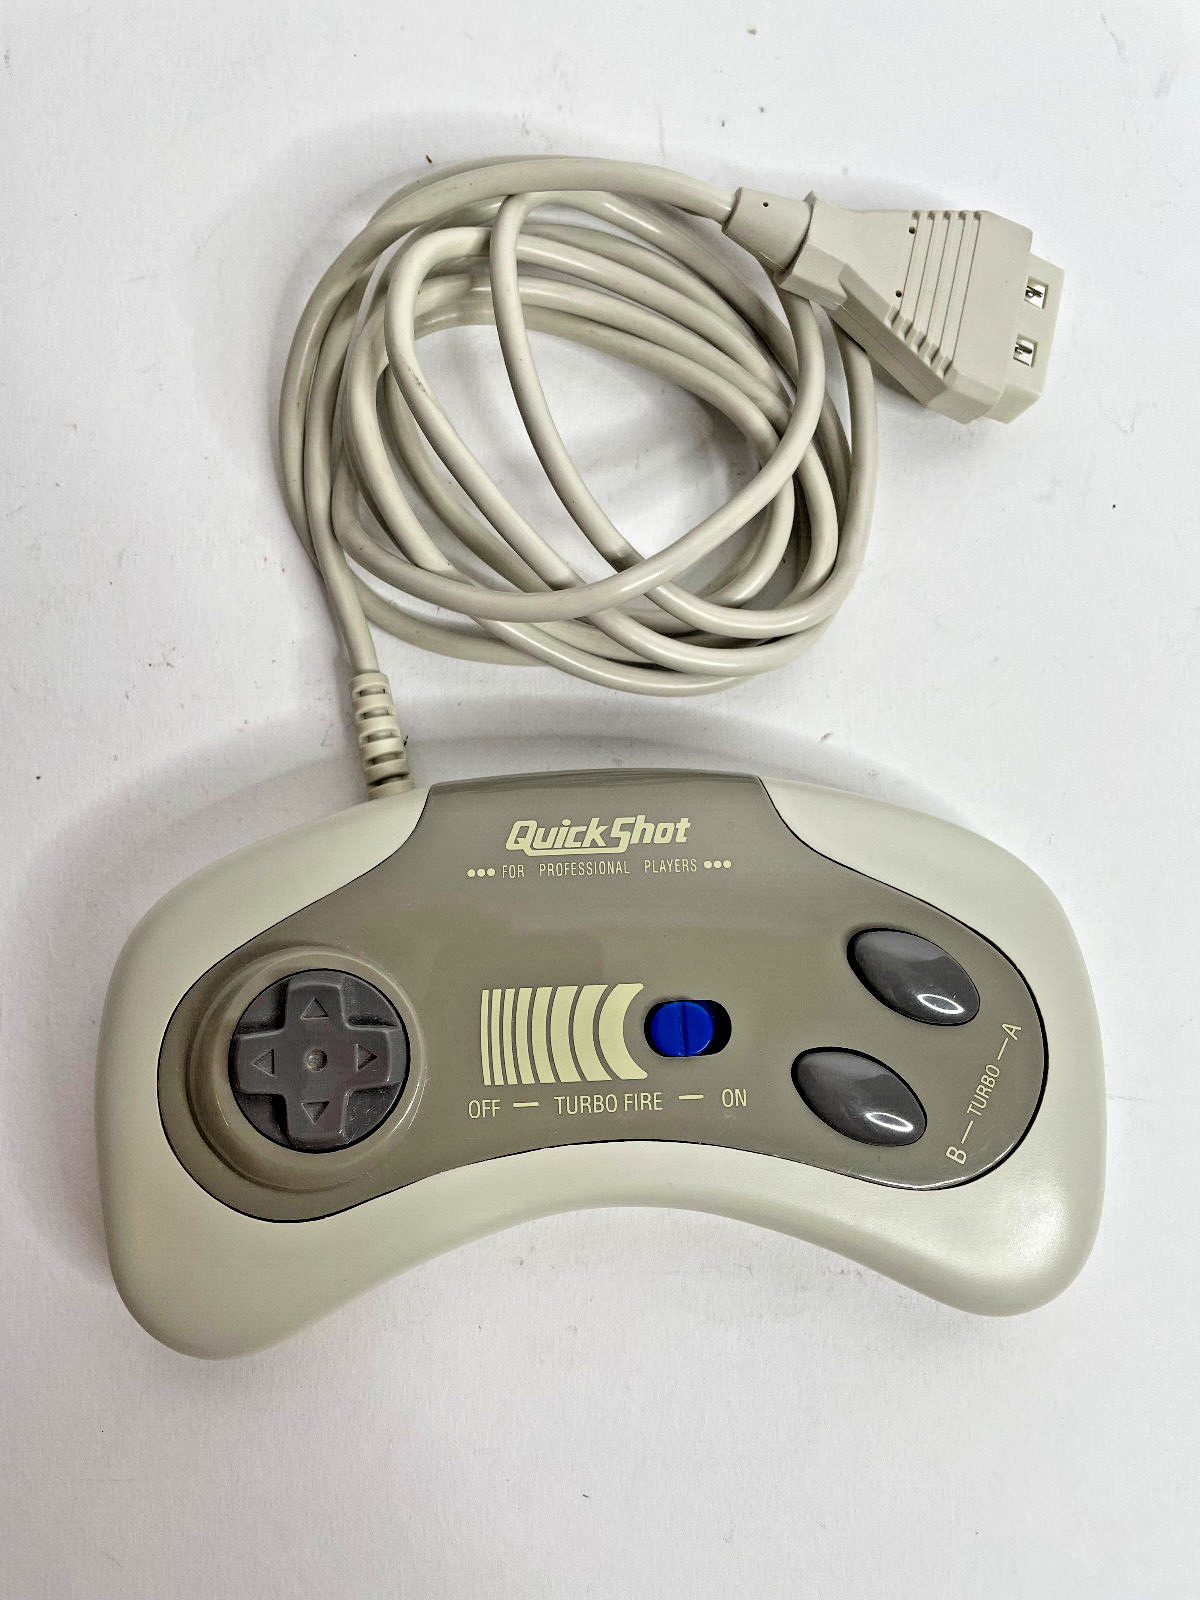 Quickshot Starfighter 5 Gamepad Controller (MN #QS-191) for IBM PC/XT/AT - USED